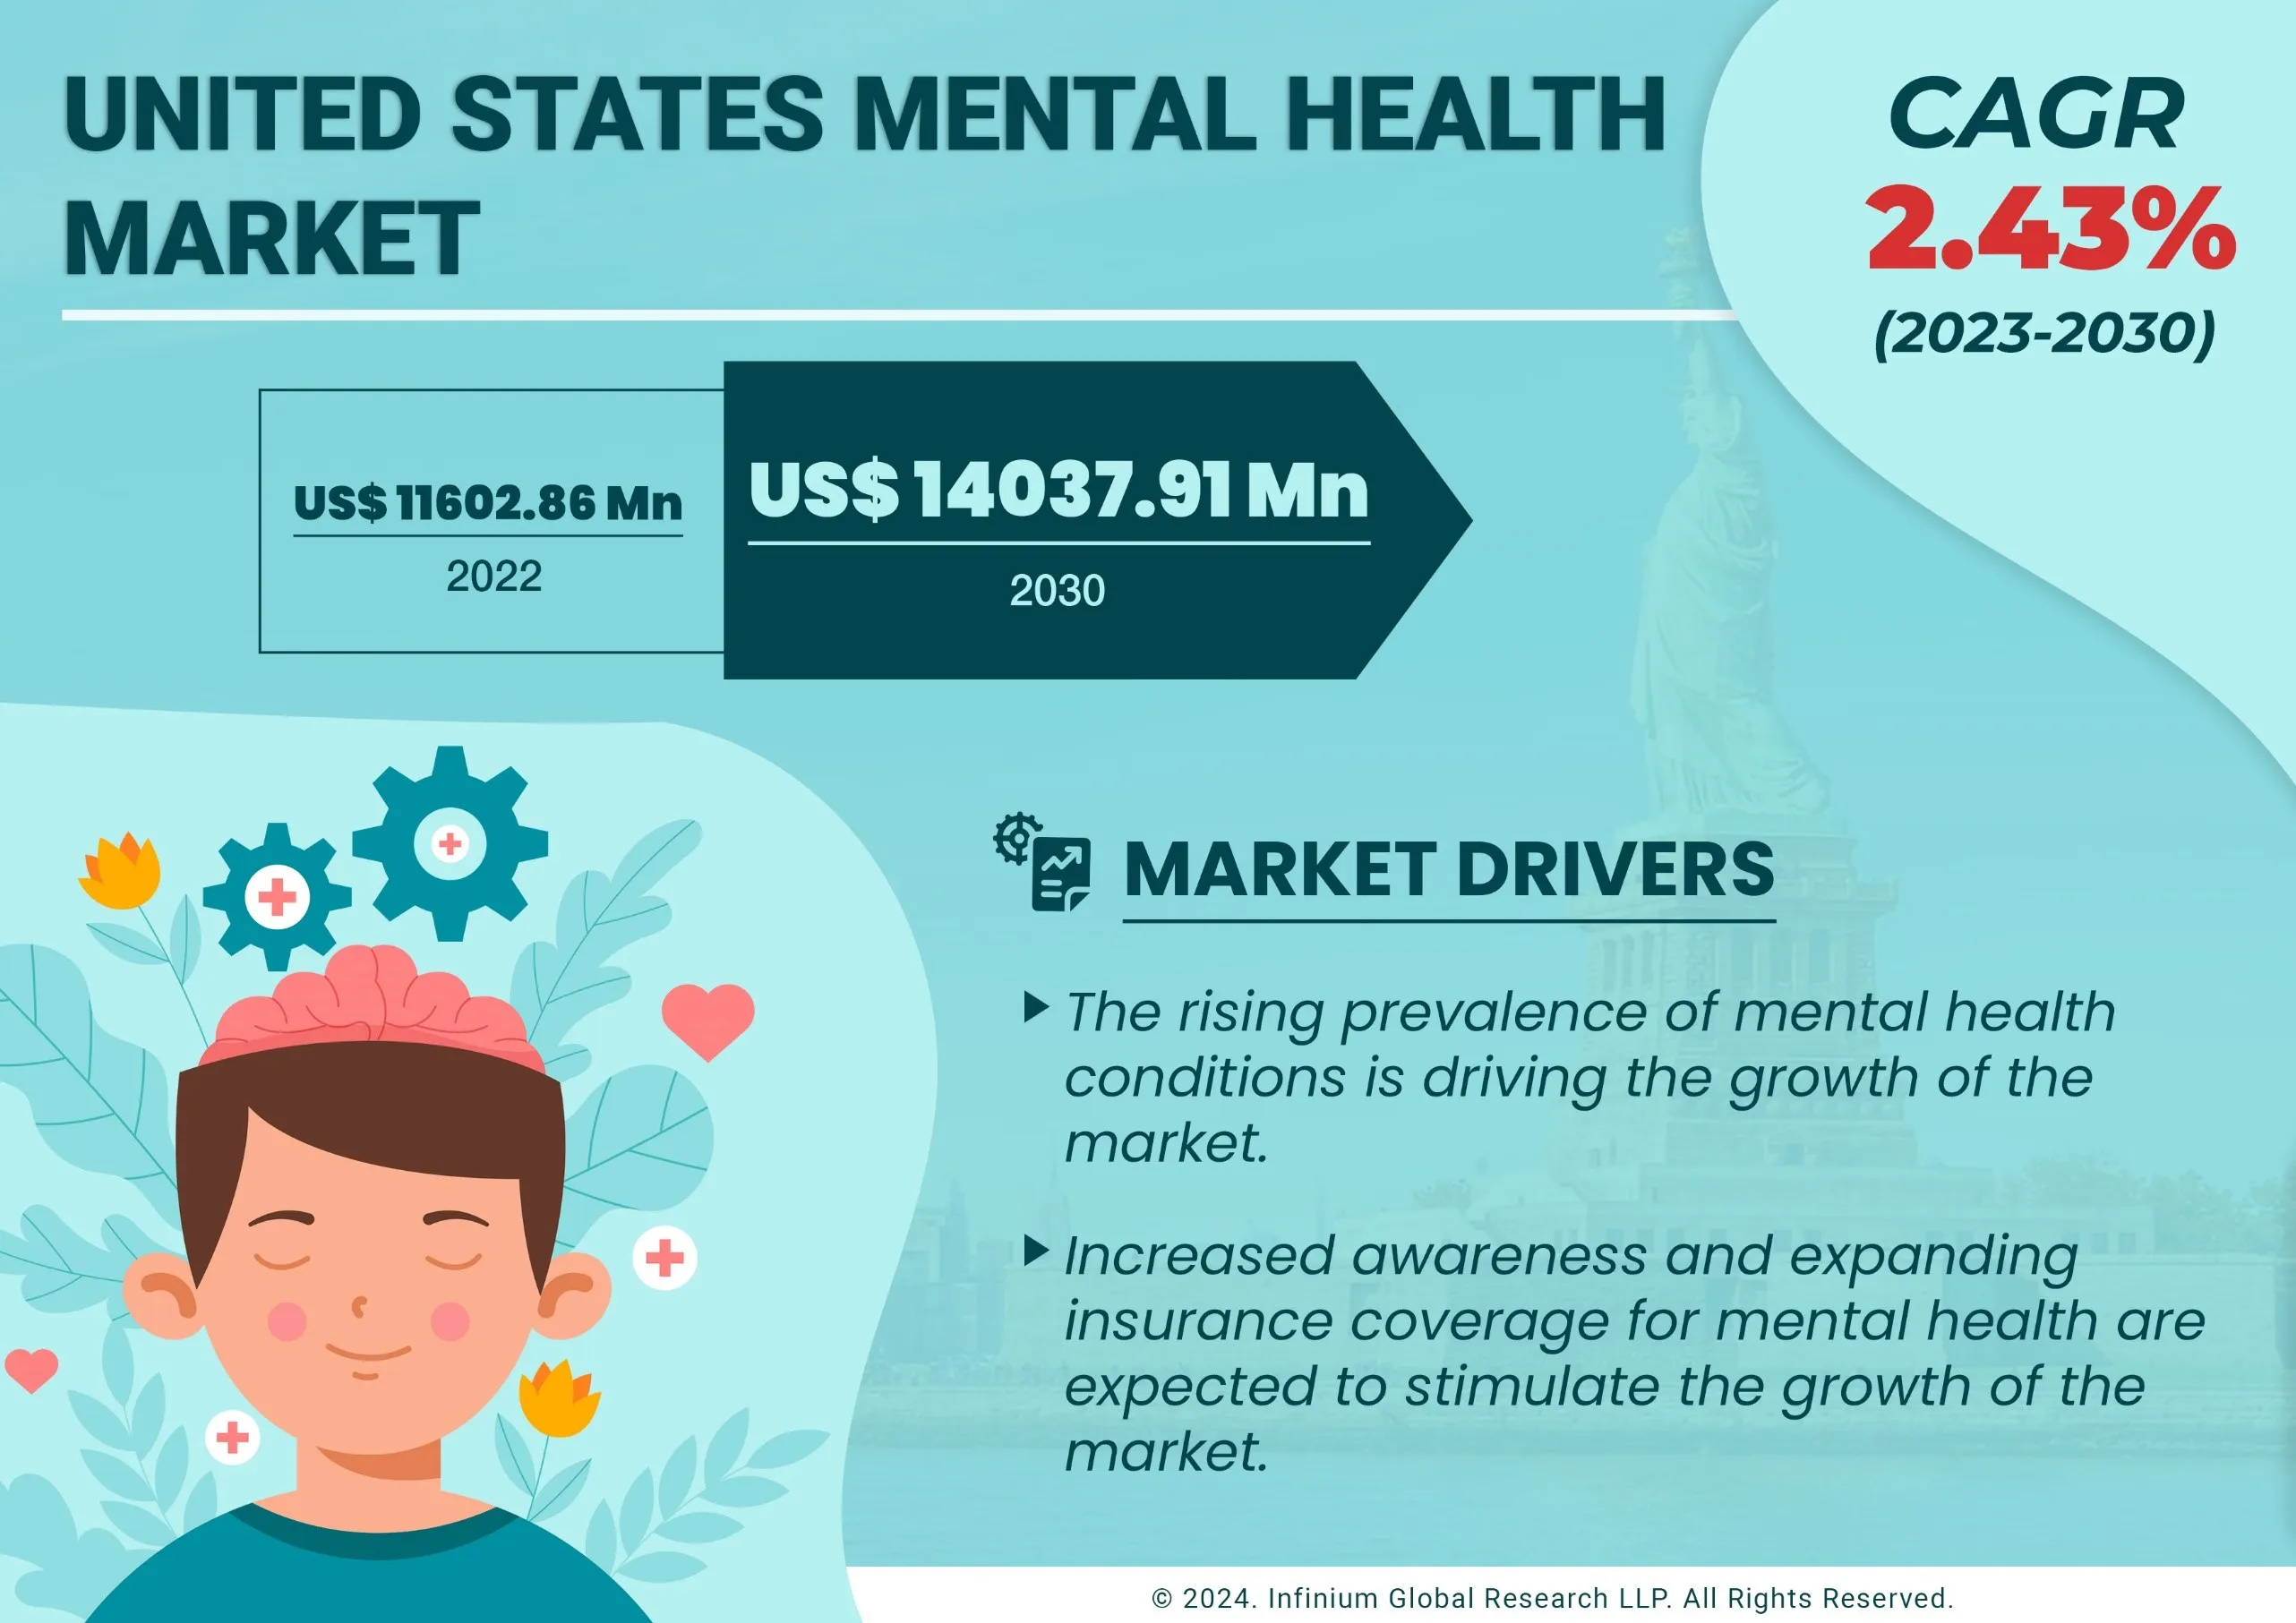 United States Mental Health Market was Valued at USD 11602.86 Million in 2022 and is Expected to Reach USD 14037.91 Million by 2030 and Grow at a CAGR of 2.43% Over the Forecast Period.